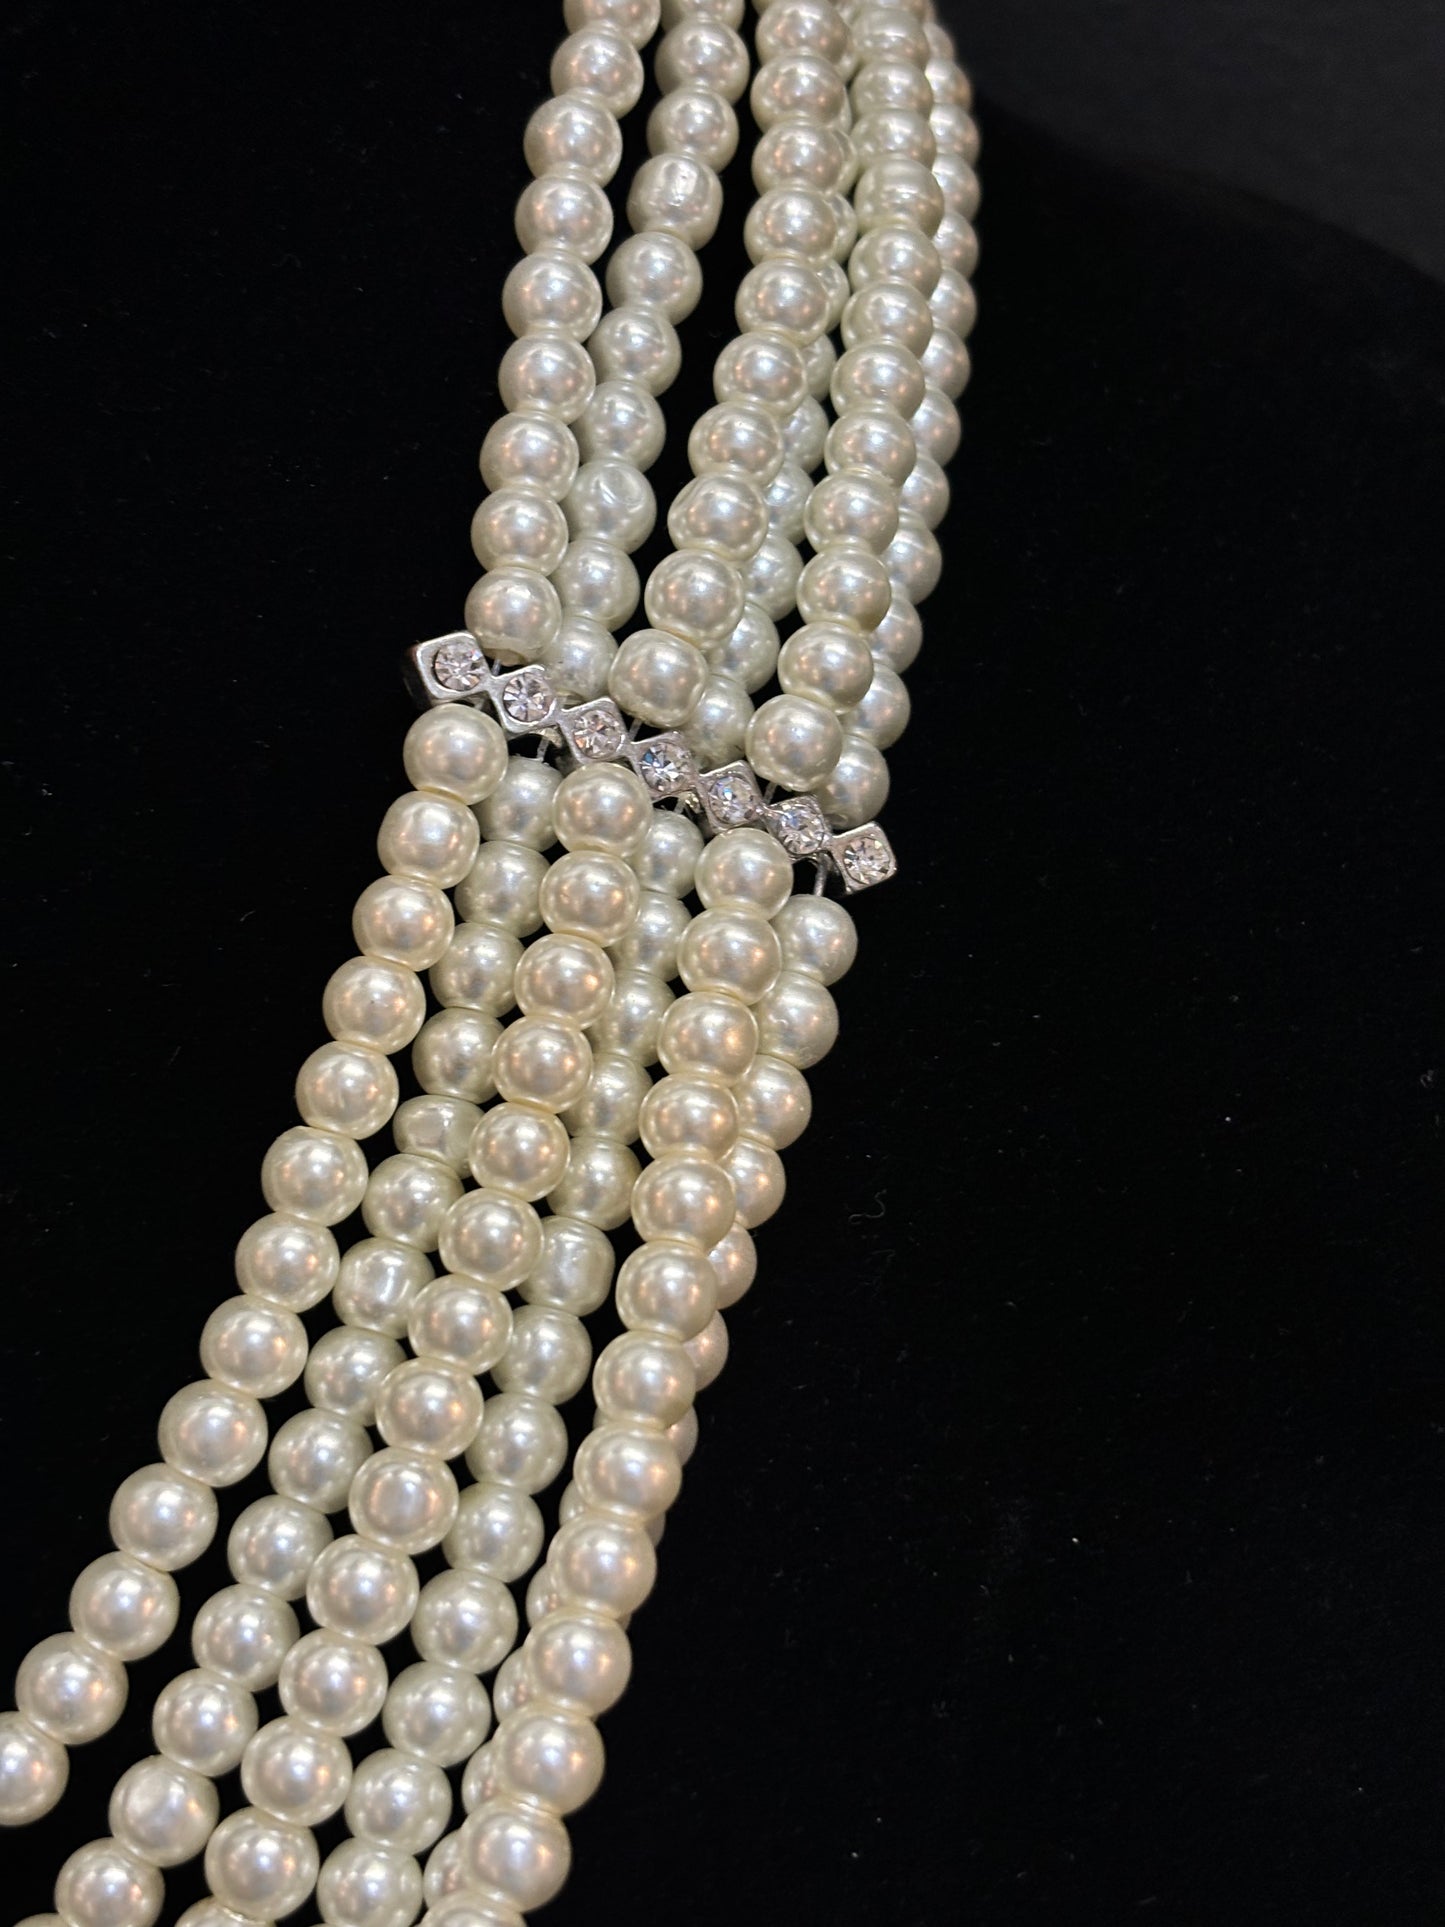 MADE-Layered Pearl Necklace with Stone Brooch